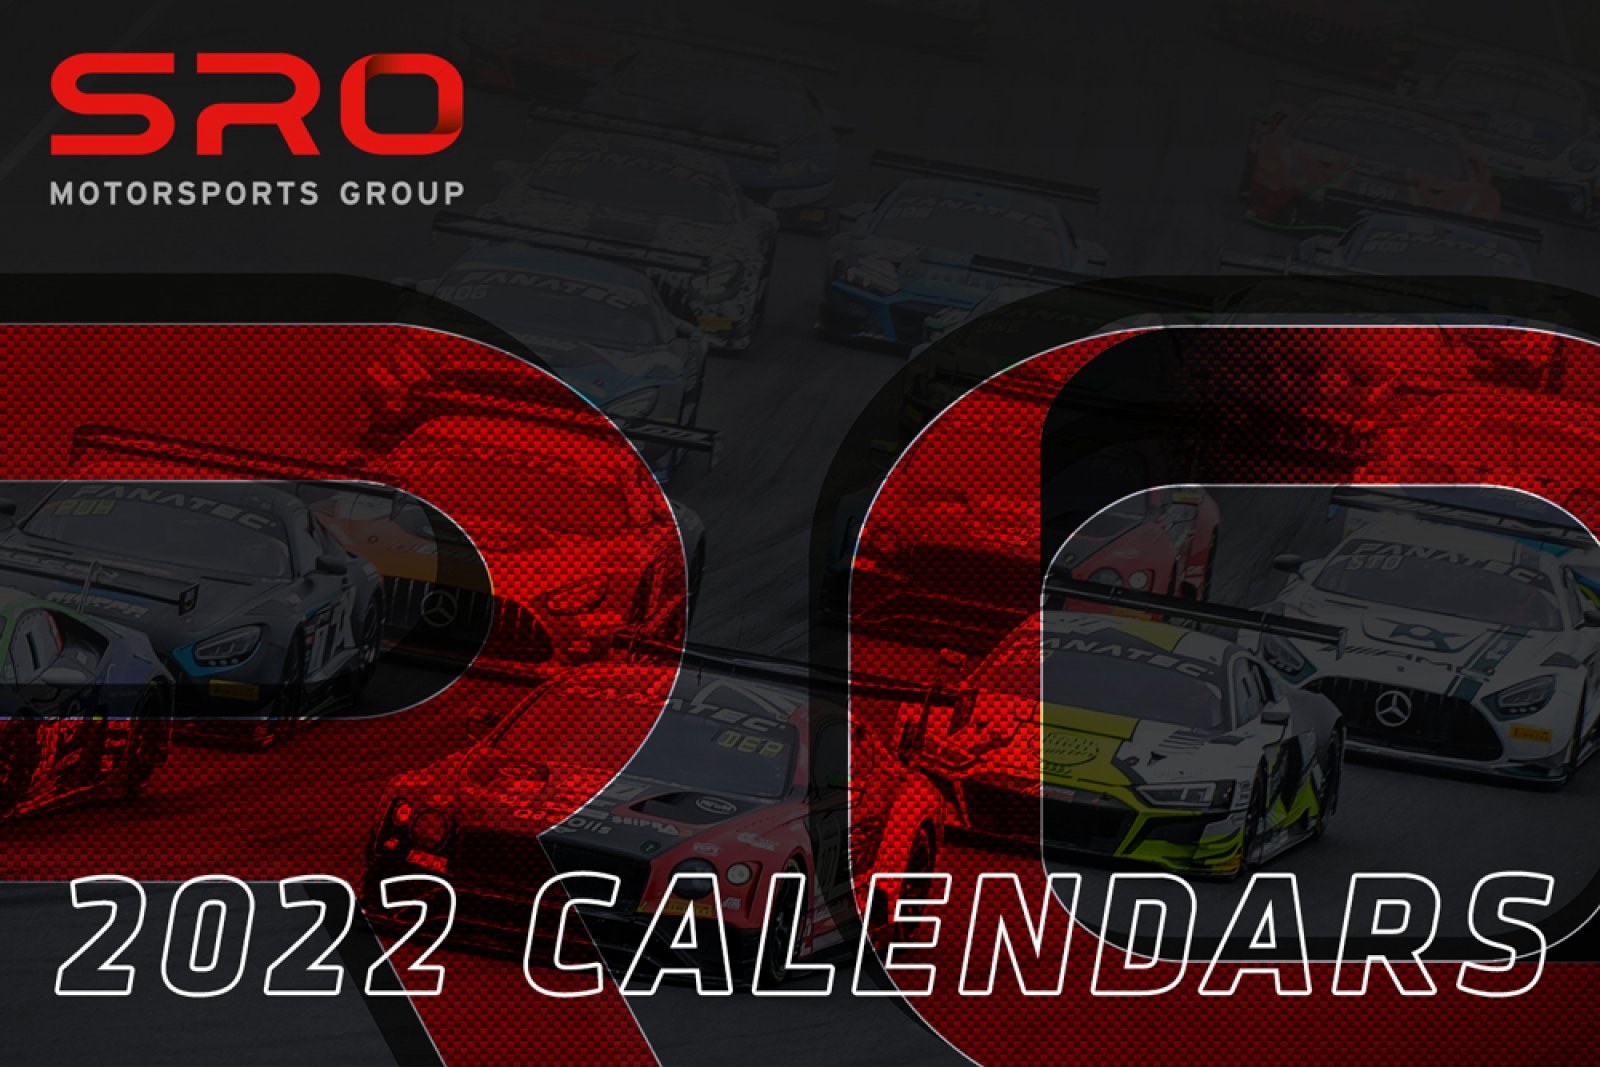 European and American series among first set of 2022 calendars confirmed by SRO Motorsports Group